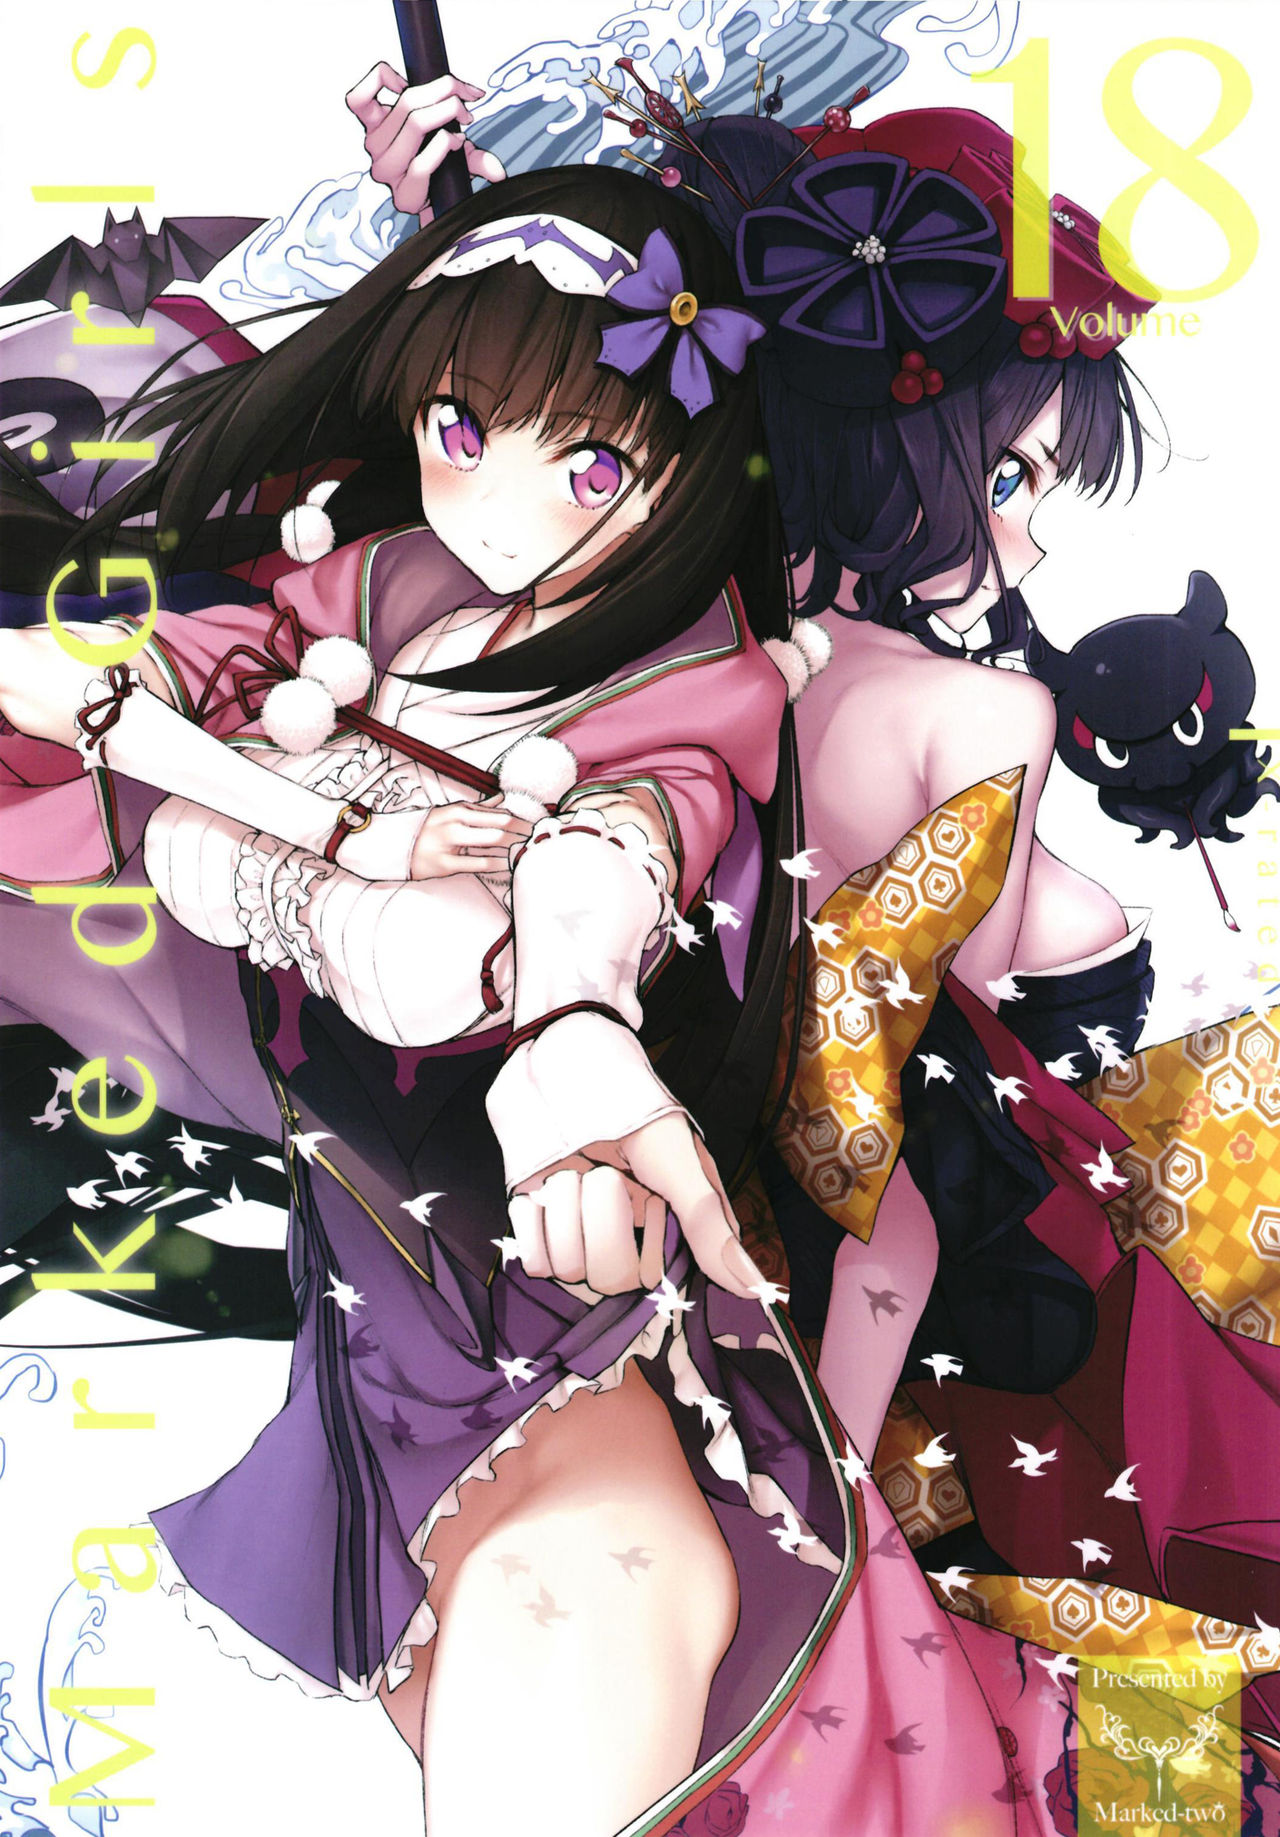 [Marked-two (Suga Hideo)] Marked Girls vol. 18 (Fate/Grand Order) [Digital] [Marked-two (スガヒデオ)] Marked Girls vol.18 (Fate/Grand Order) [DL版]